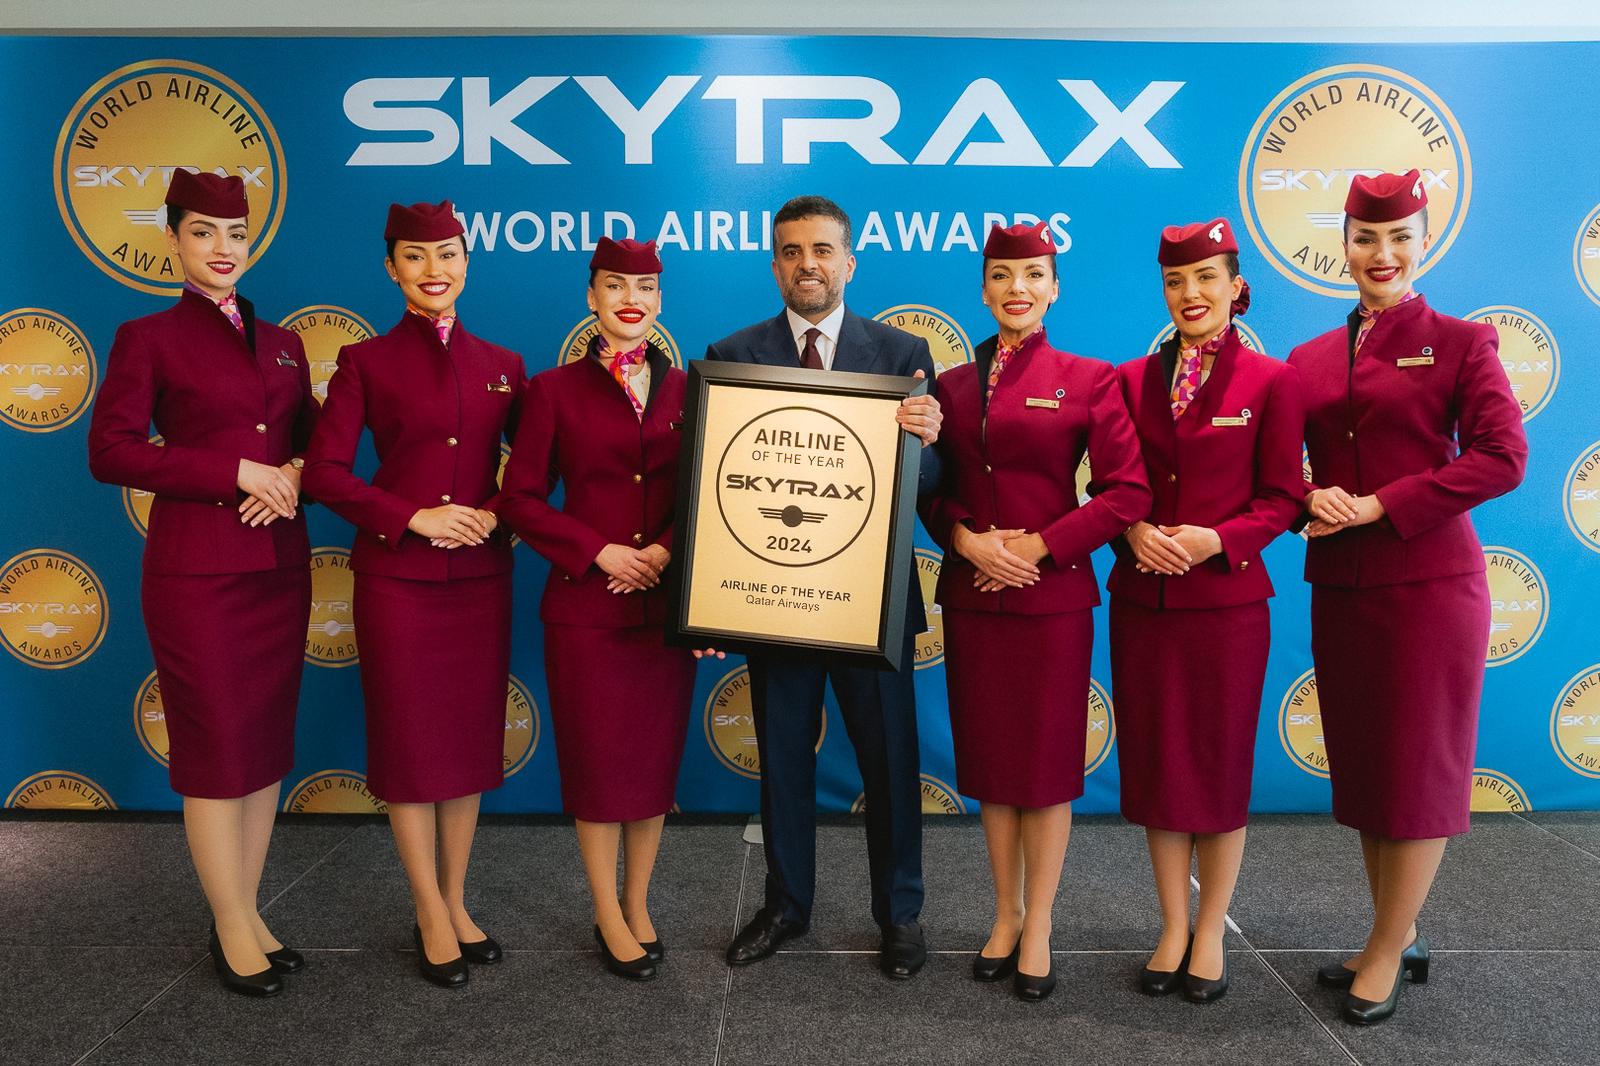 Qatar Airways named 'Airline of the Year' for record eighth time